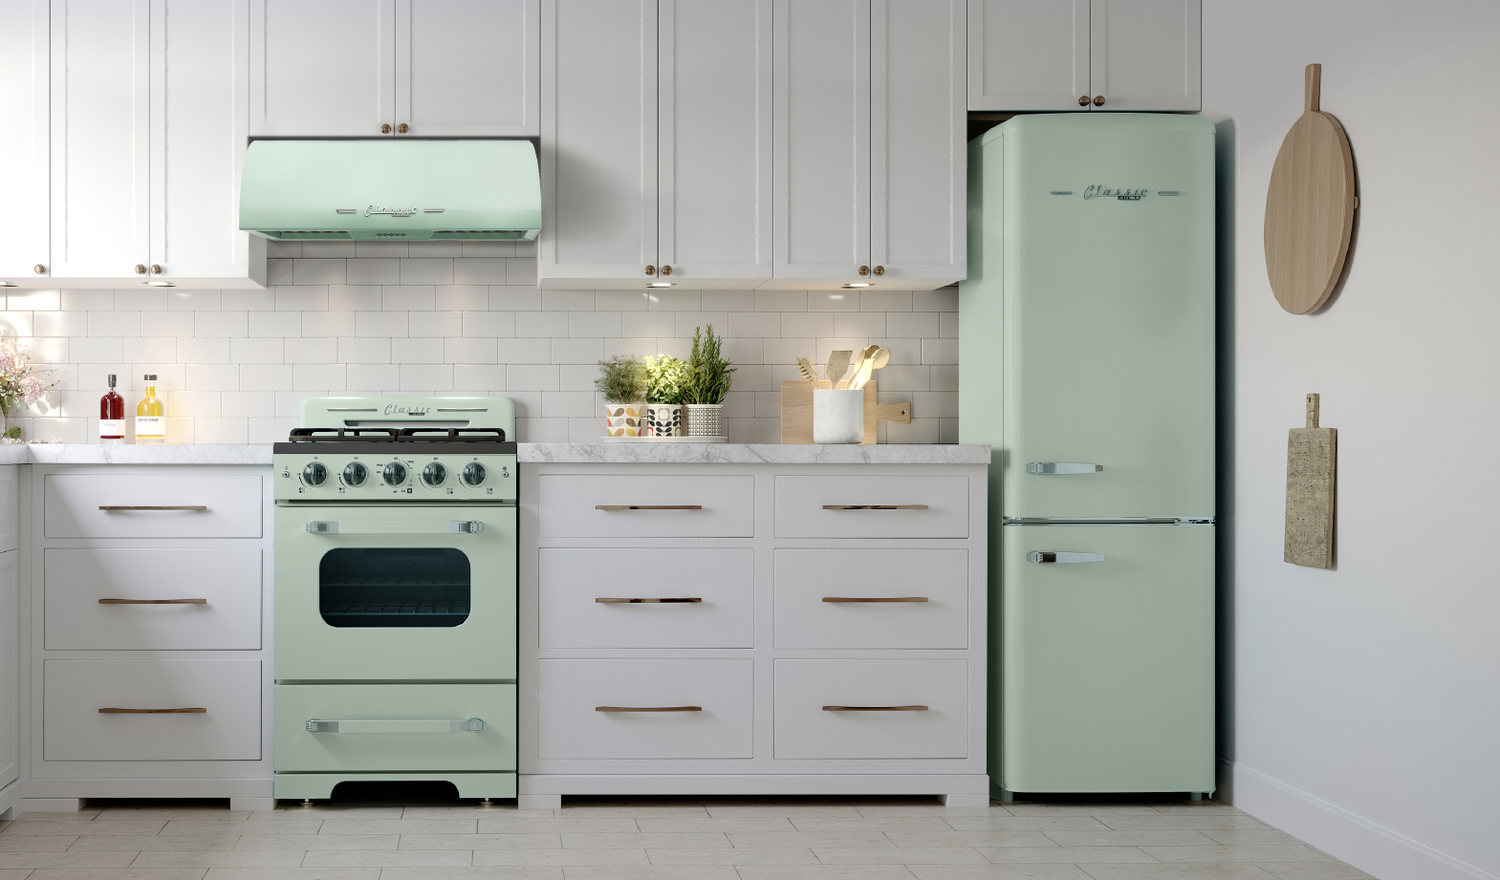 10 retro appliances to give your kitchen a blast from the past